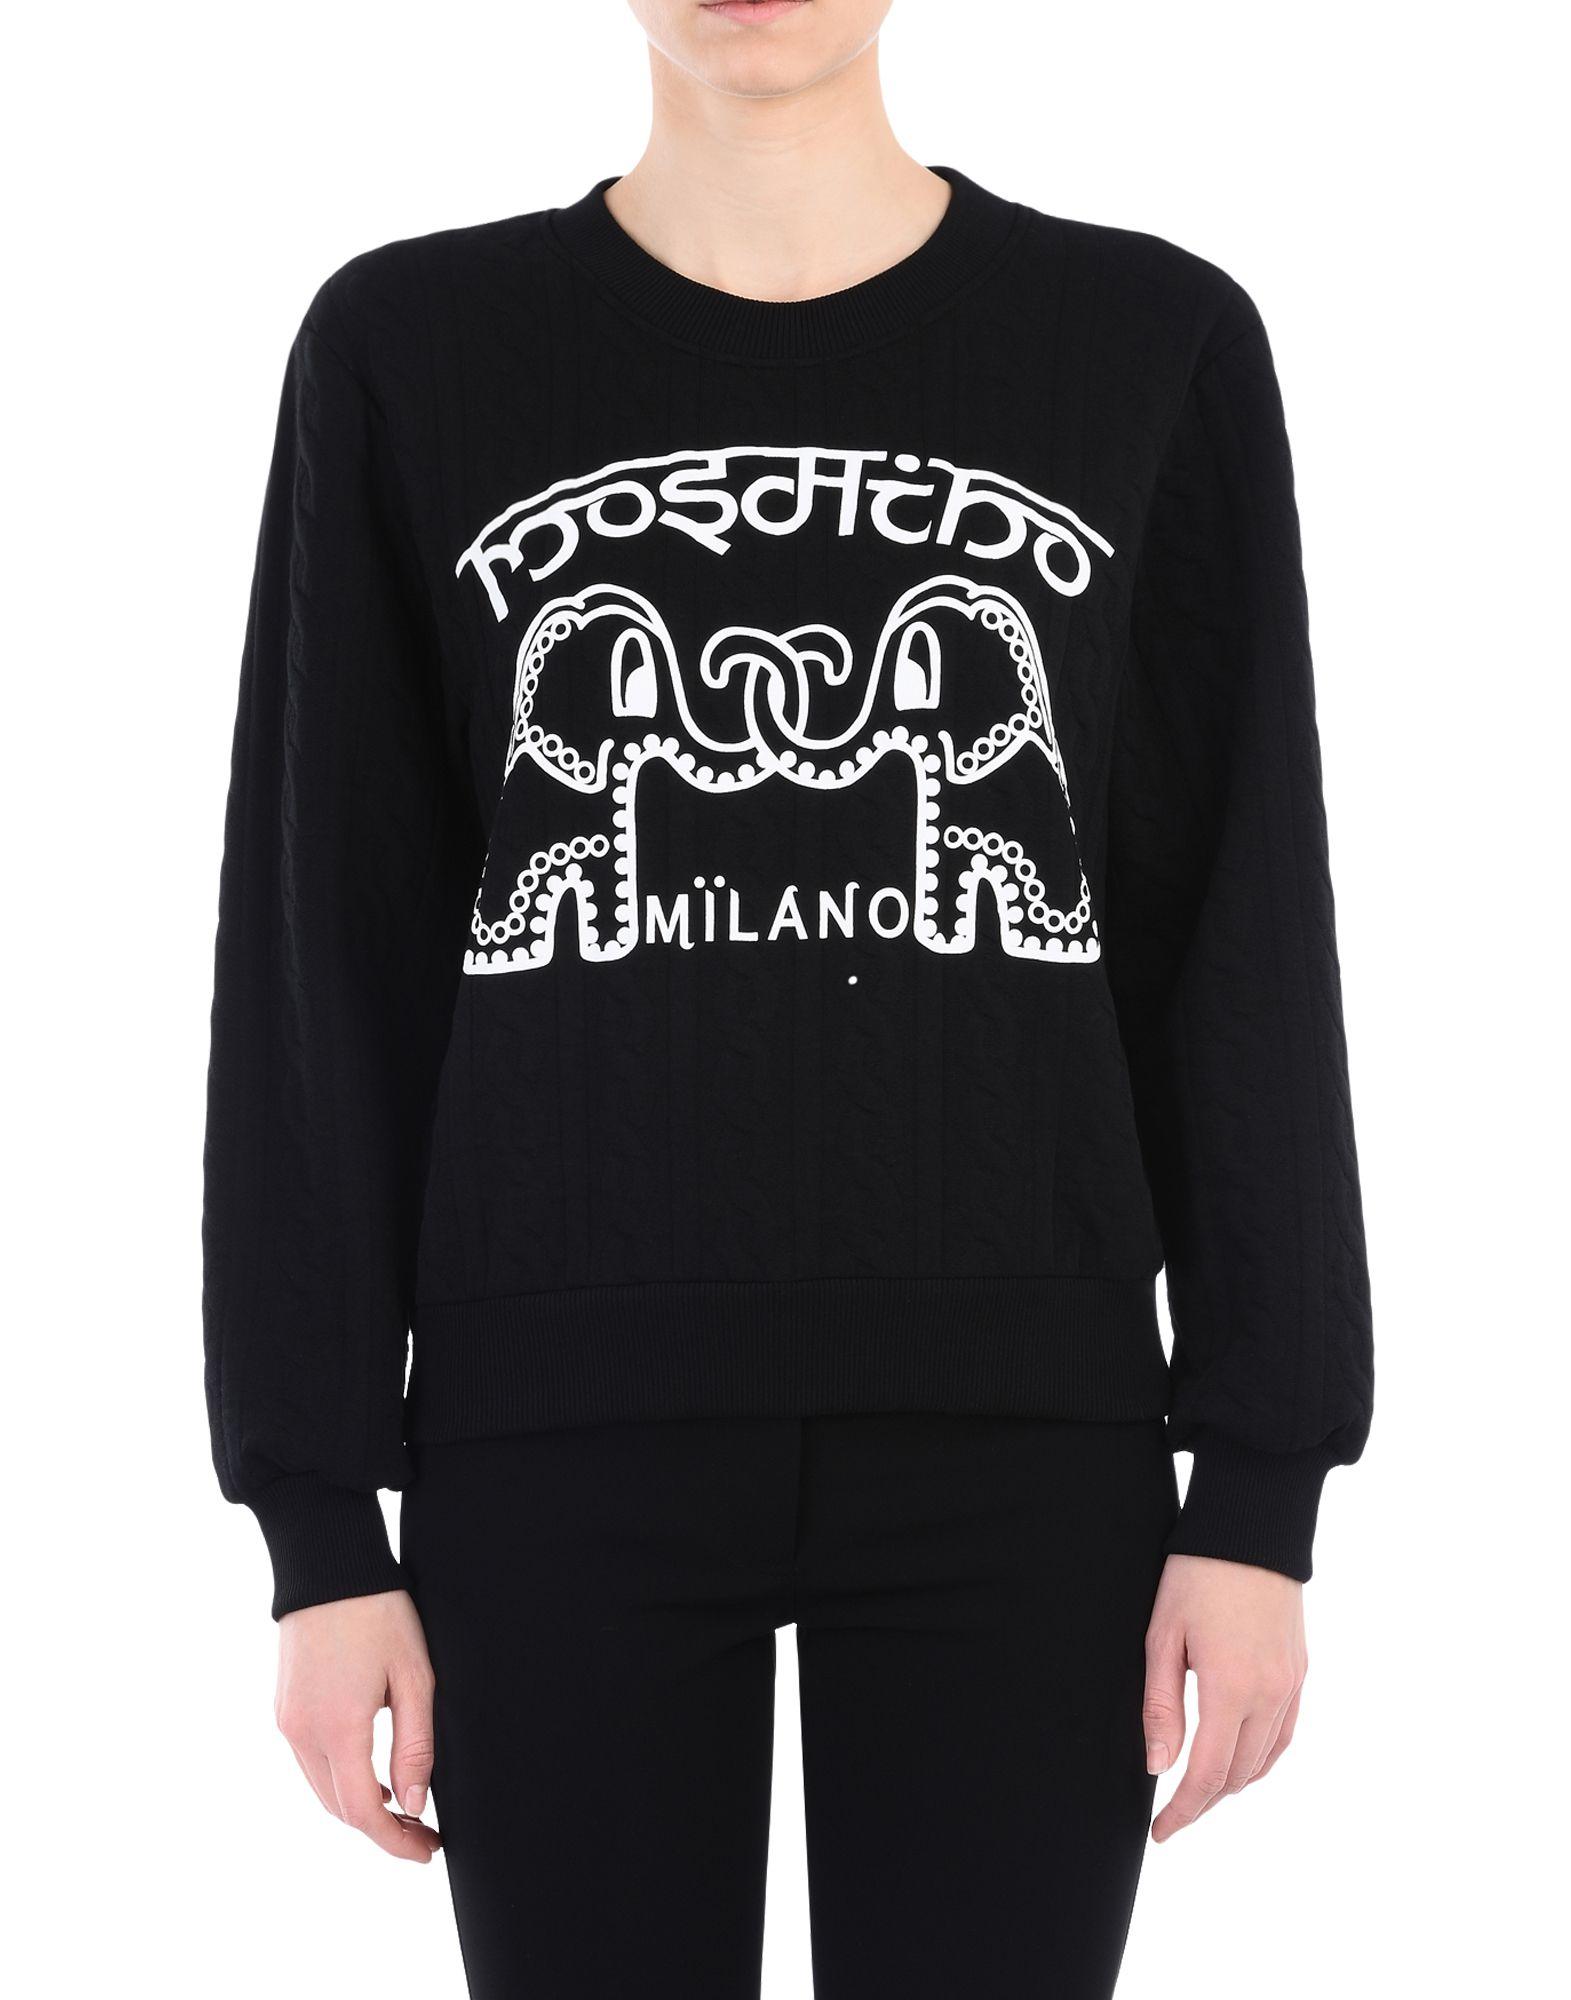 Lyst - Moschino Long Sleeve Sweater in Black